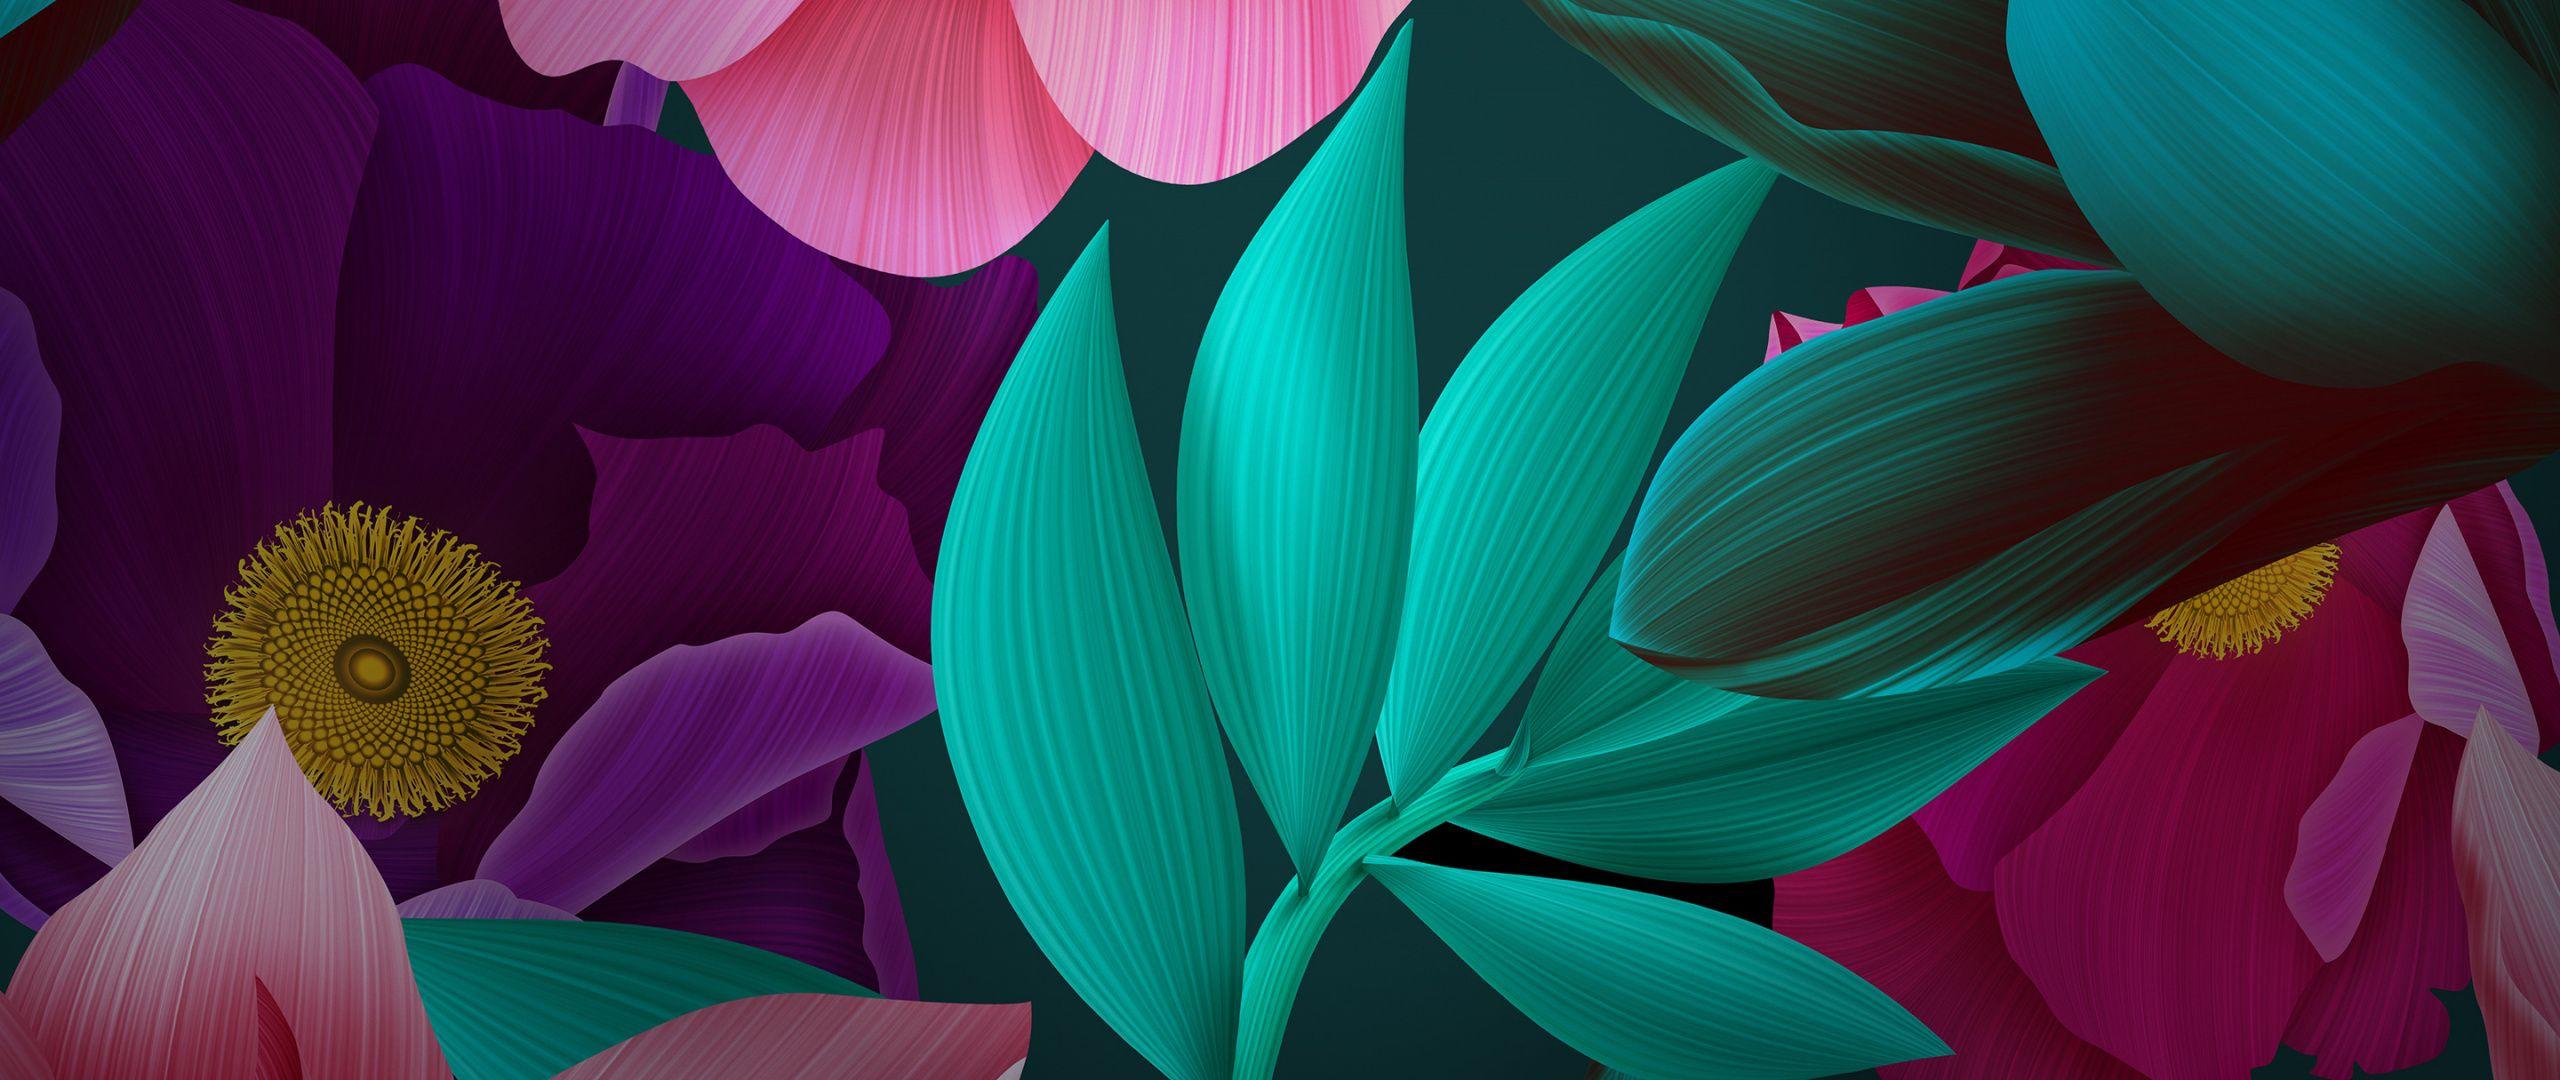 Download 2560x1080 Wallpaper Flowers, Leaves, Huawei Mate Stock